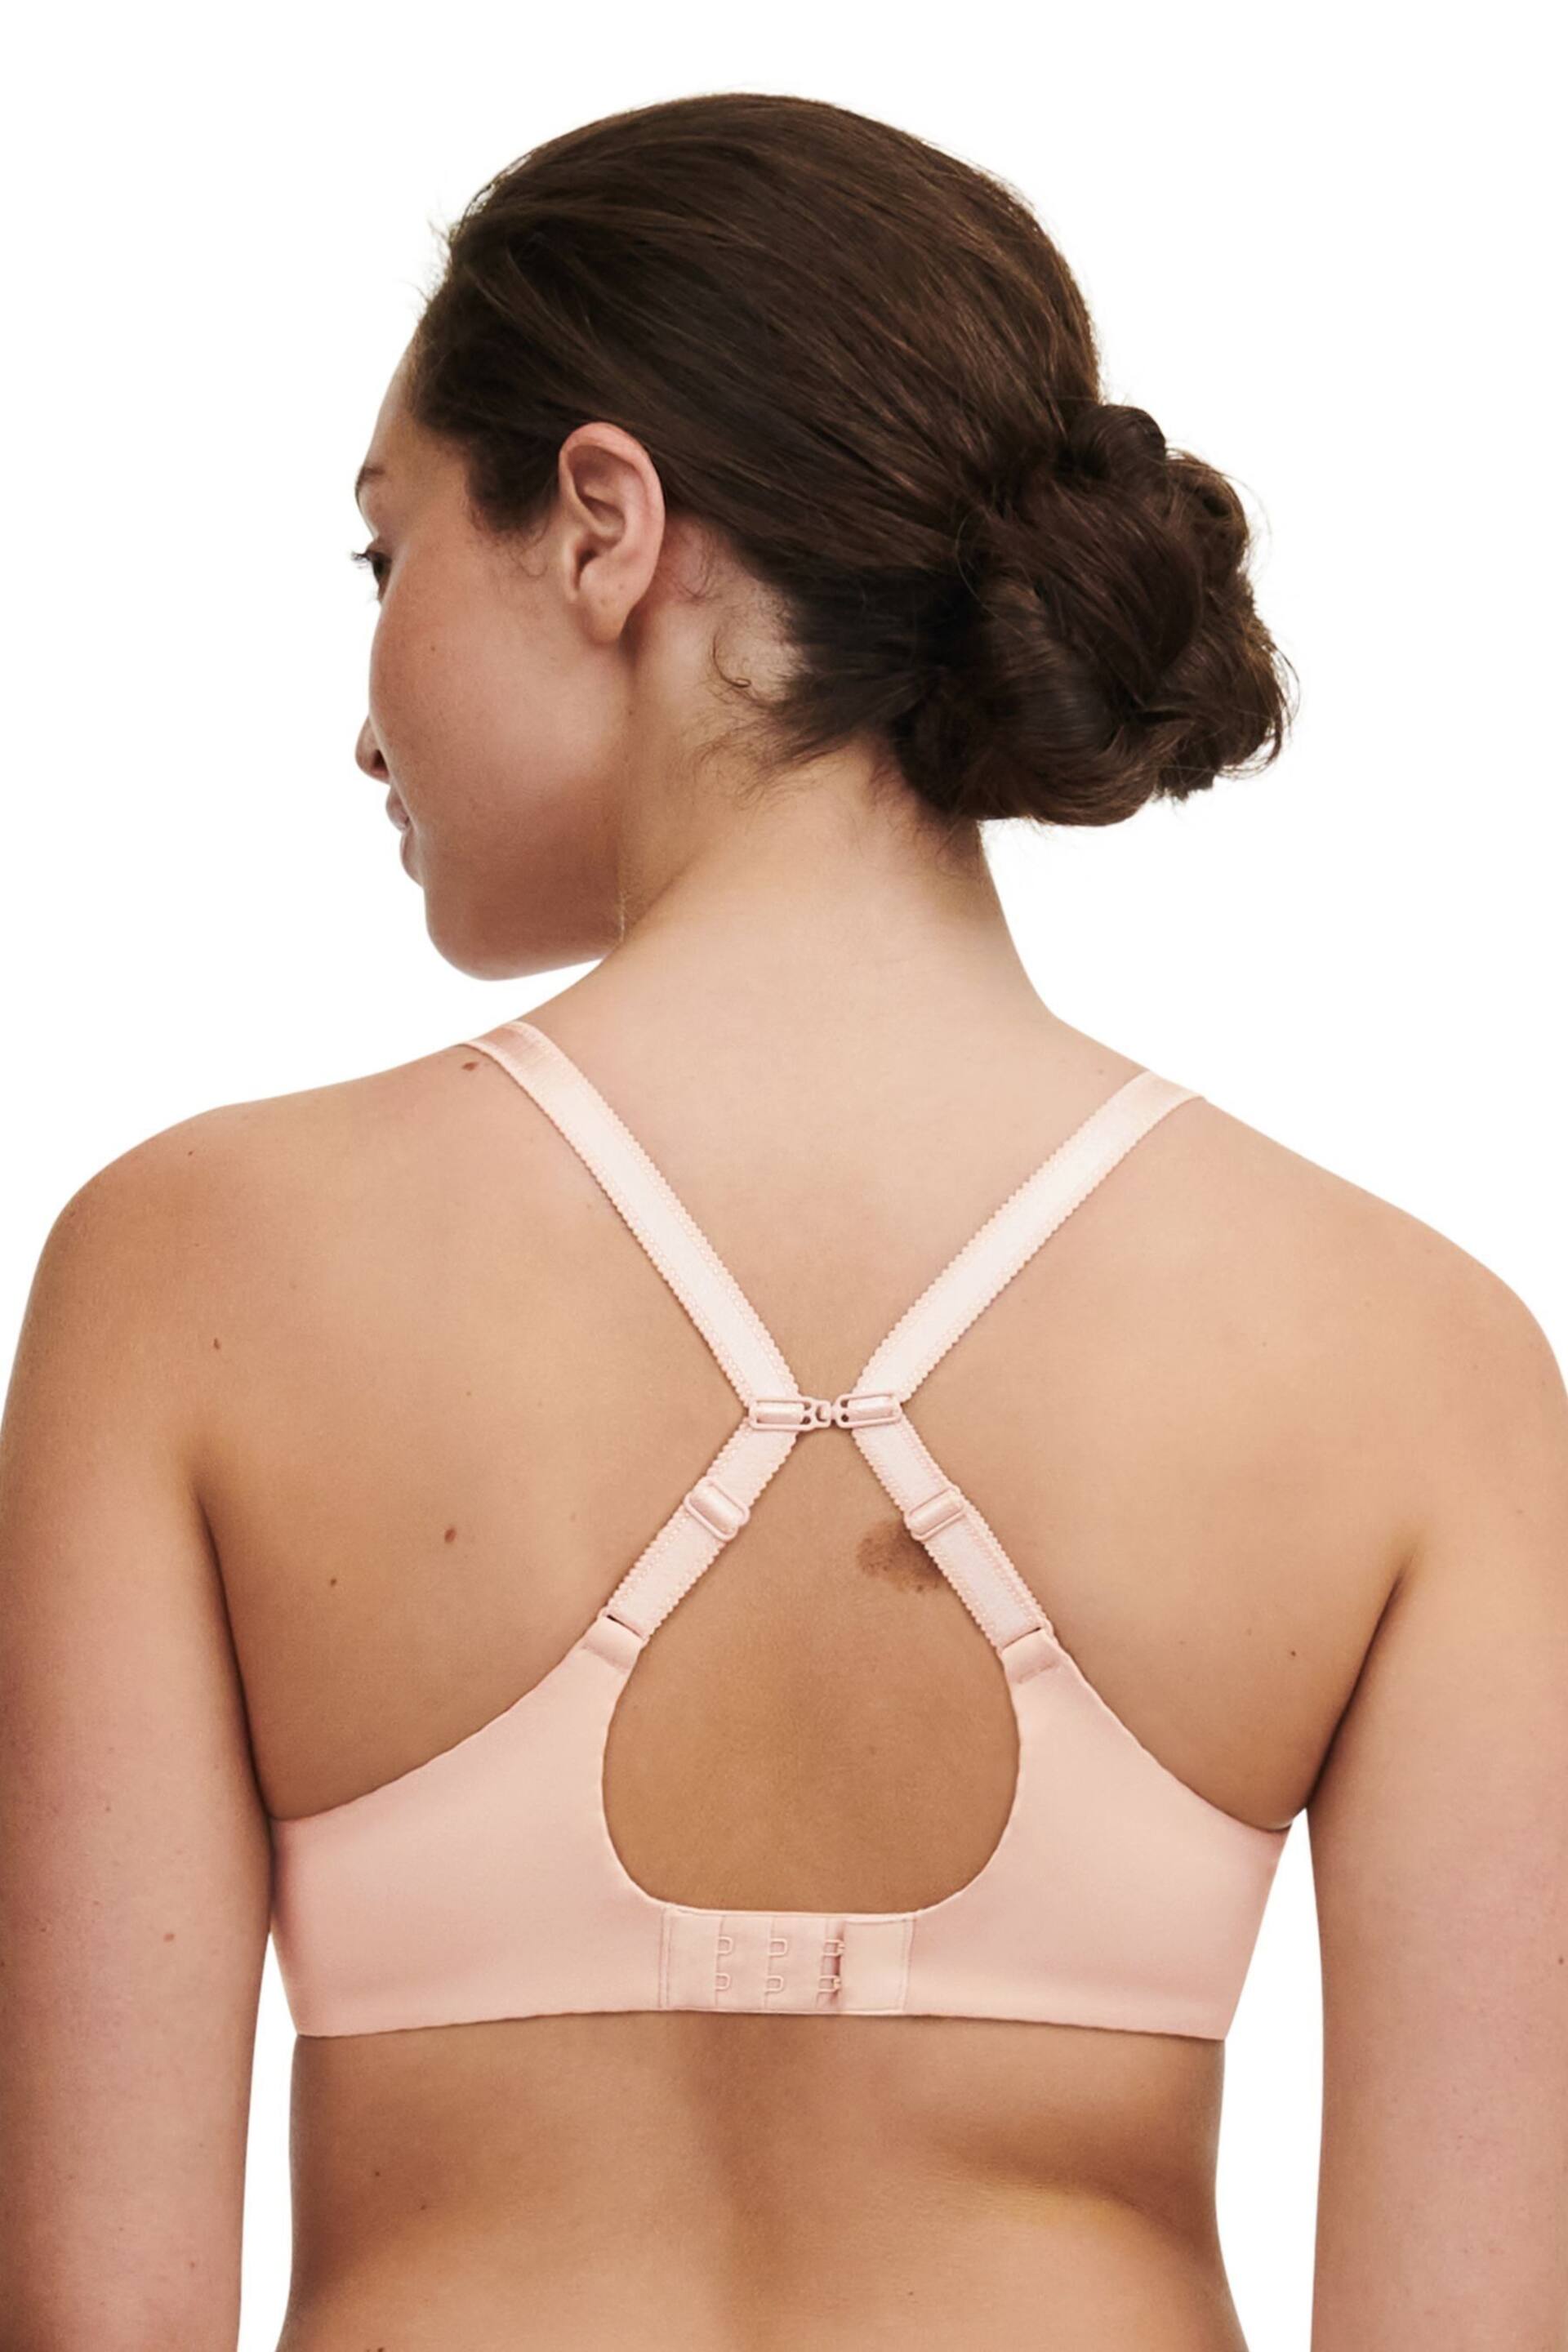 Chantelle Norah Chic Soft Feel Plunge Underwired T-Shirt Bra - Image 3 of 5